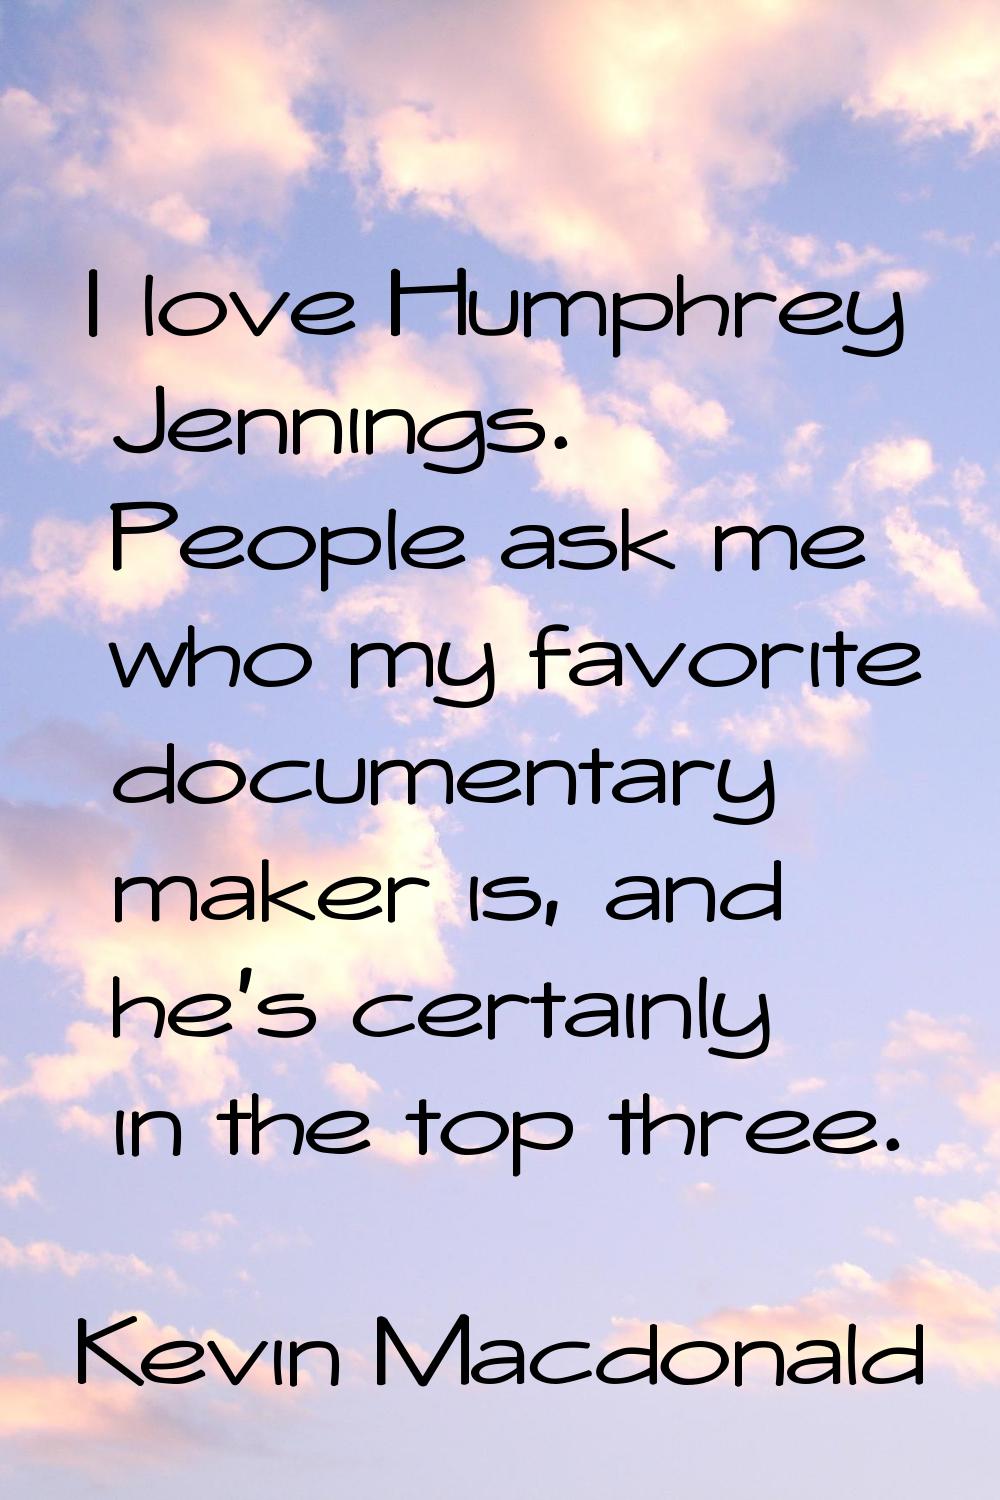 I love Humphrey Jennings. People ask me who my favorite documentary maker is, and he's certainly in